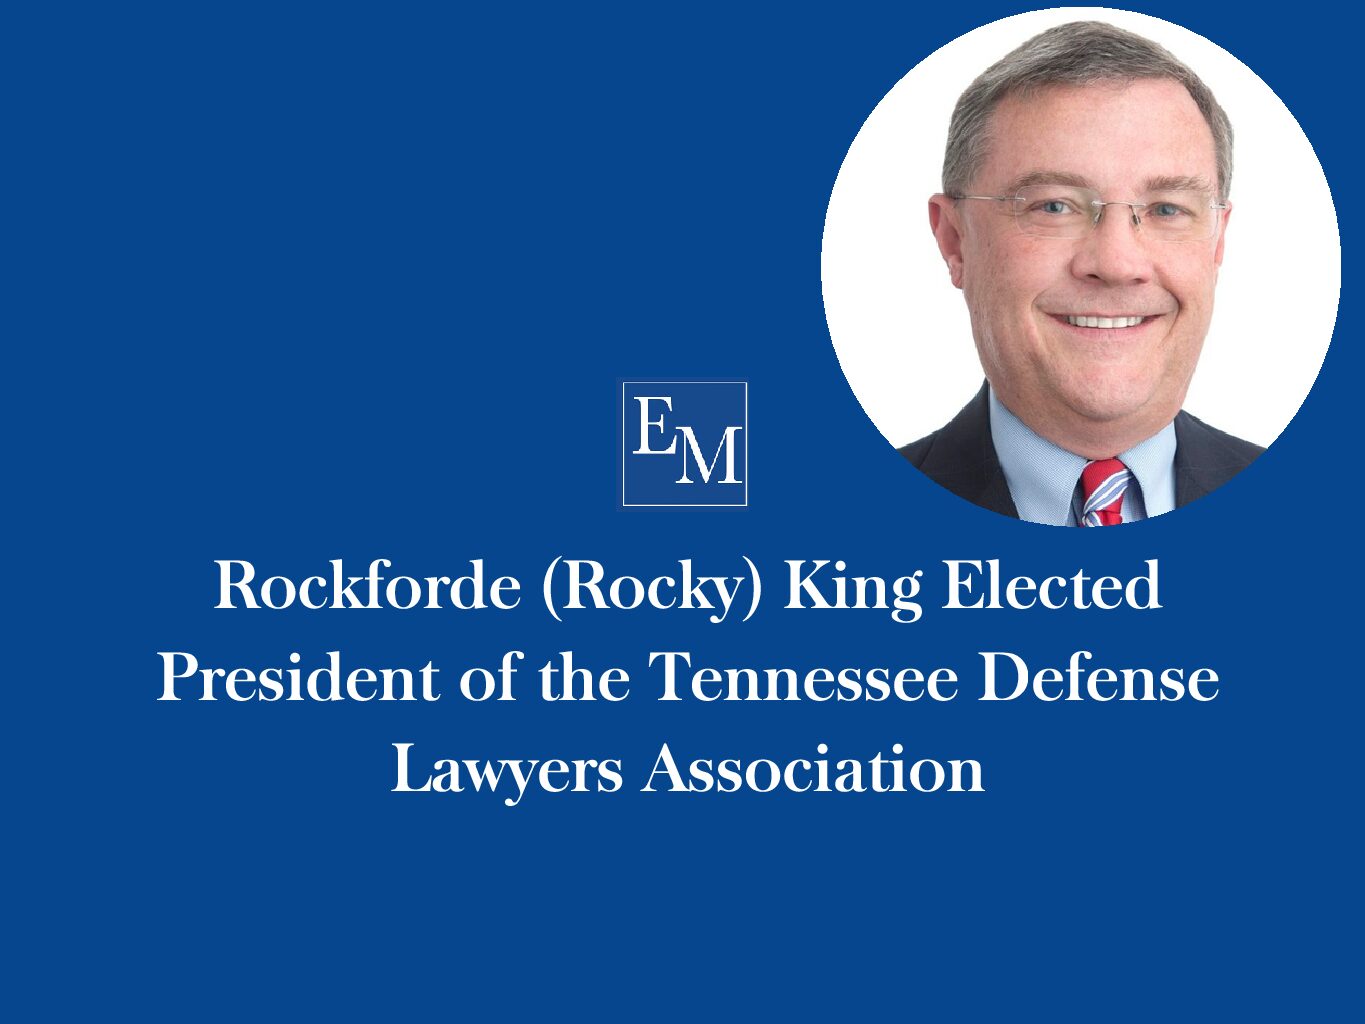 Rockforde (Rocky) King elected President of the Tennessee Defense Lawyers Association